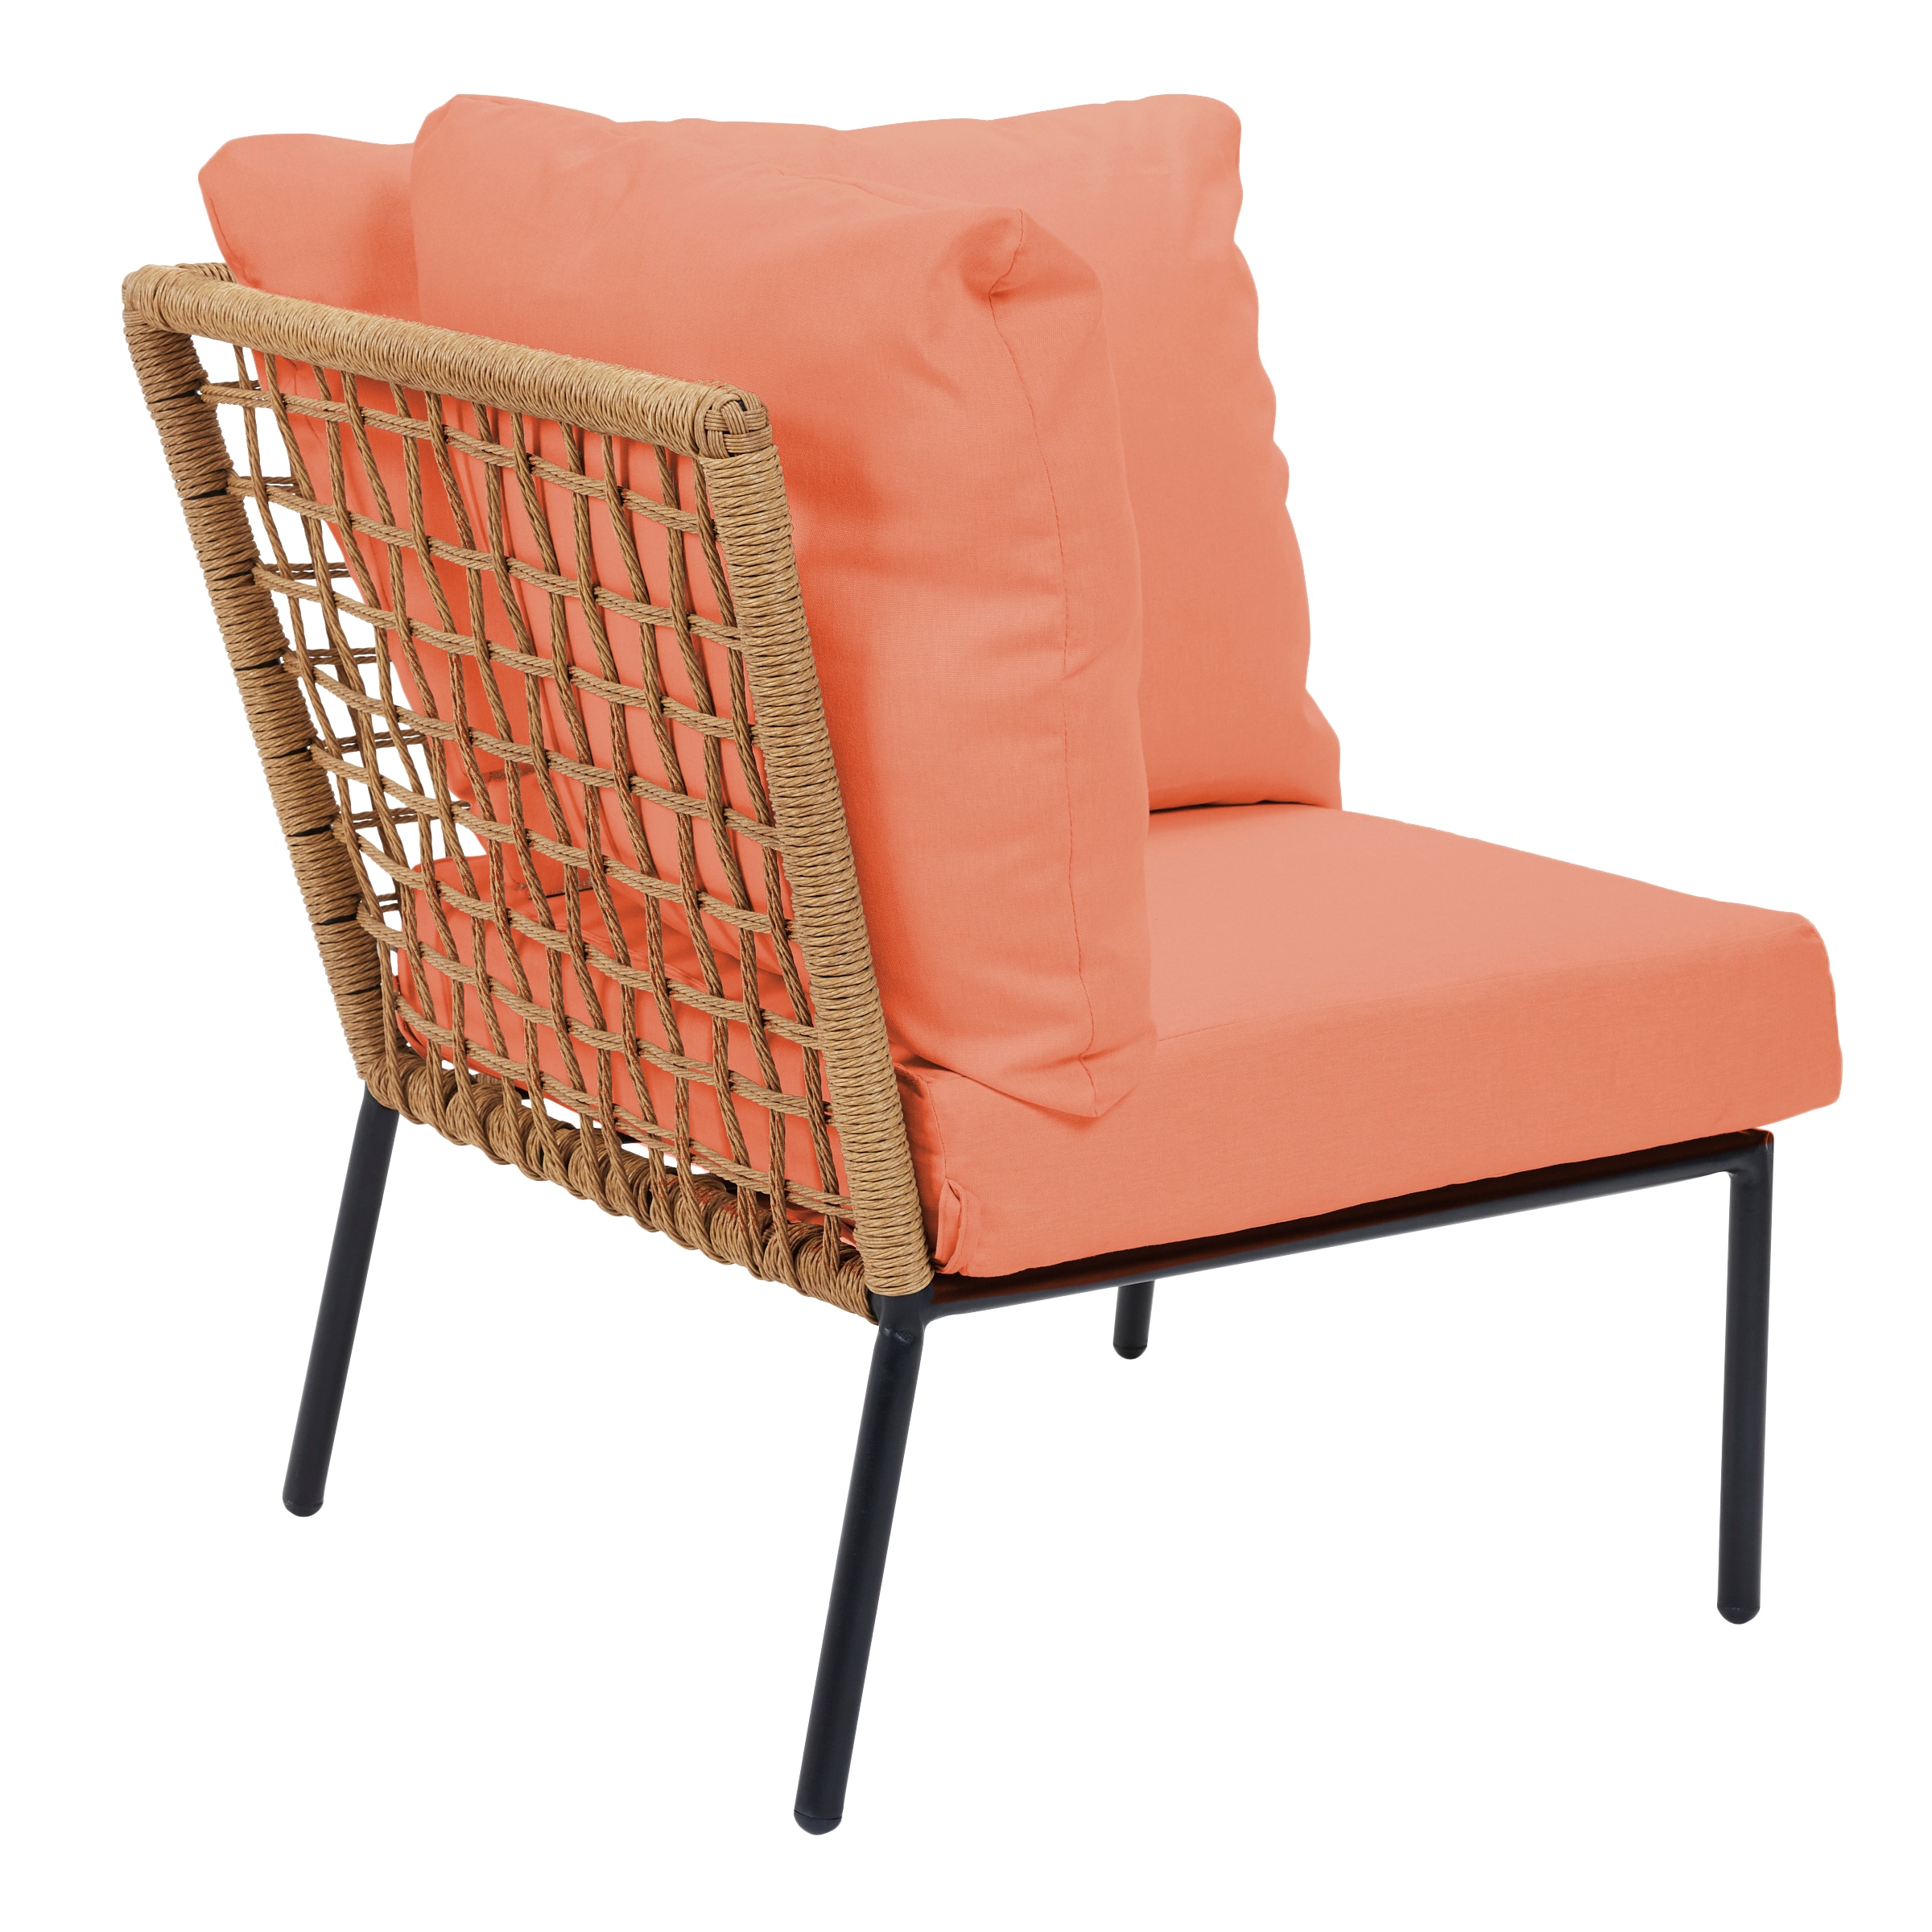 Origin 21 with the Set Patio Clairmont Wicker Patio at 4-Piece Cushions in Conversation Sets Orange Conversation department